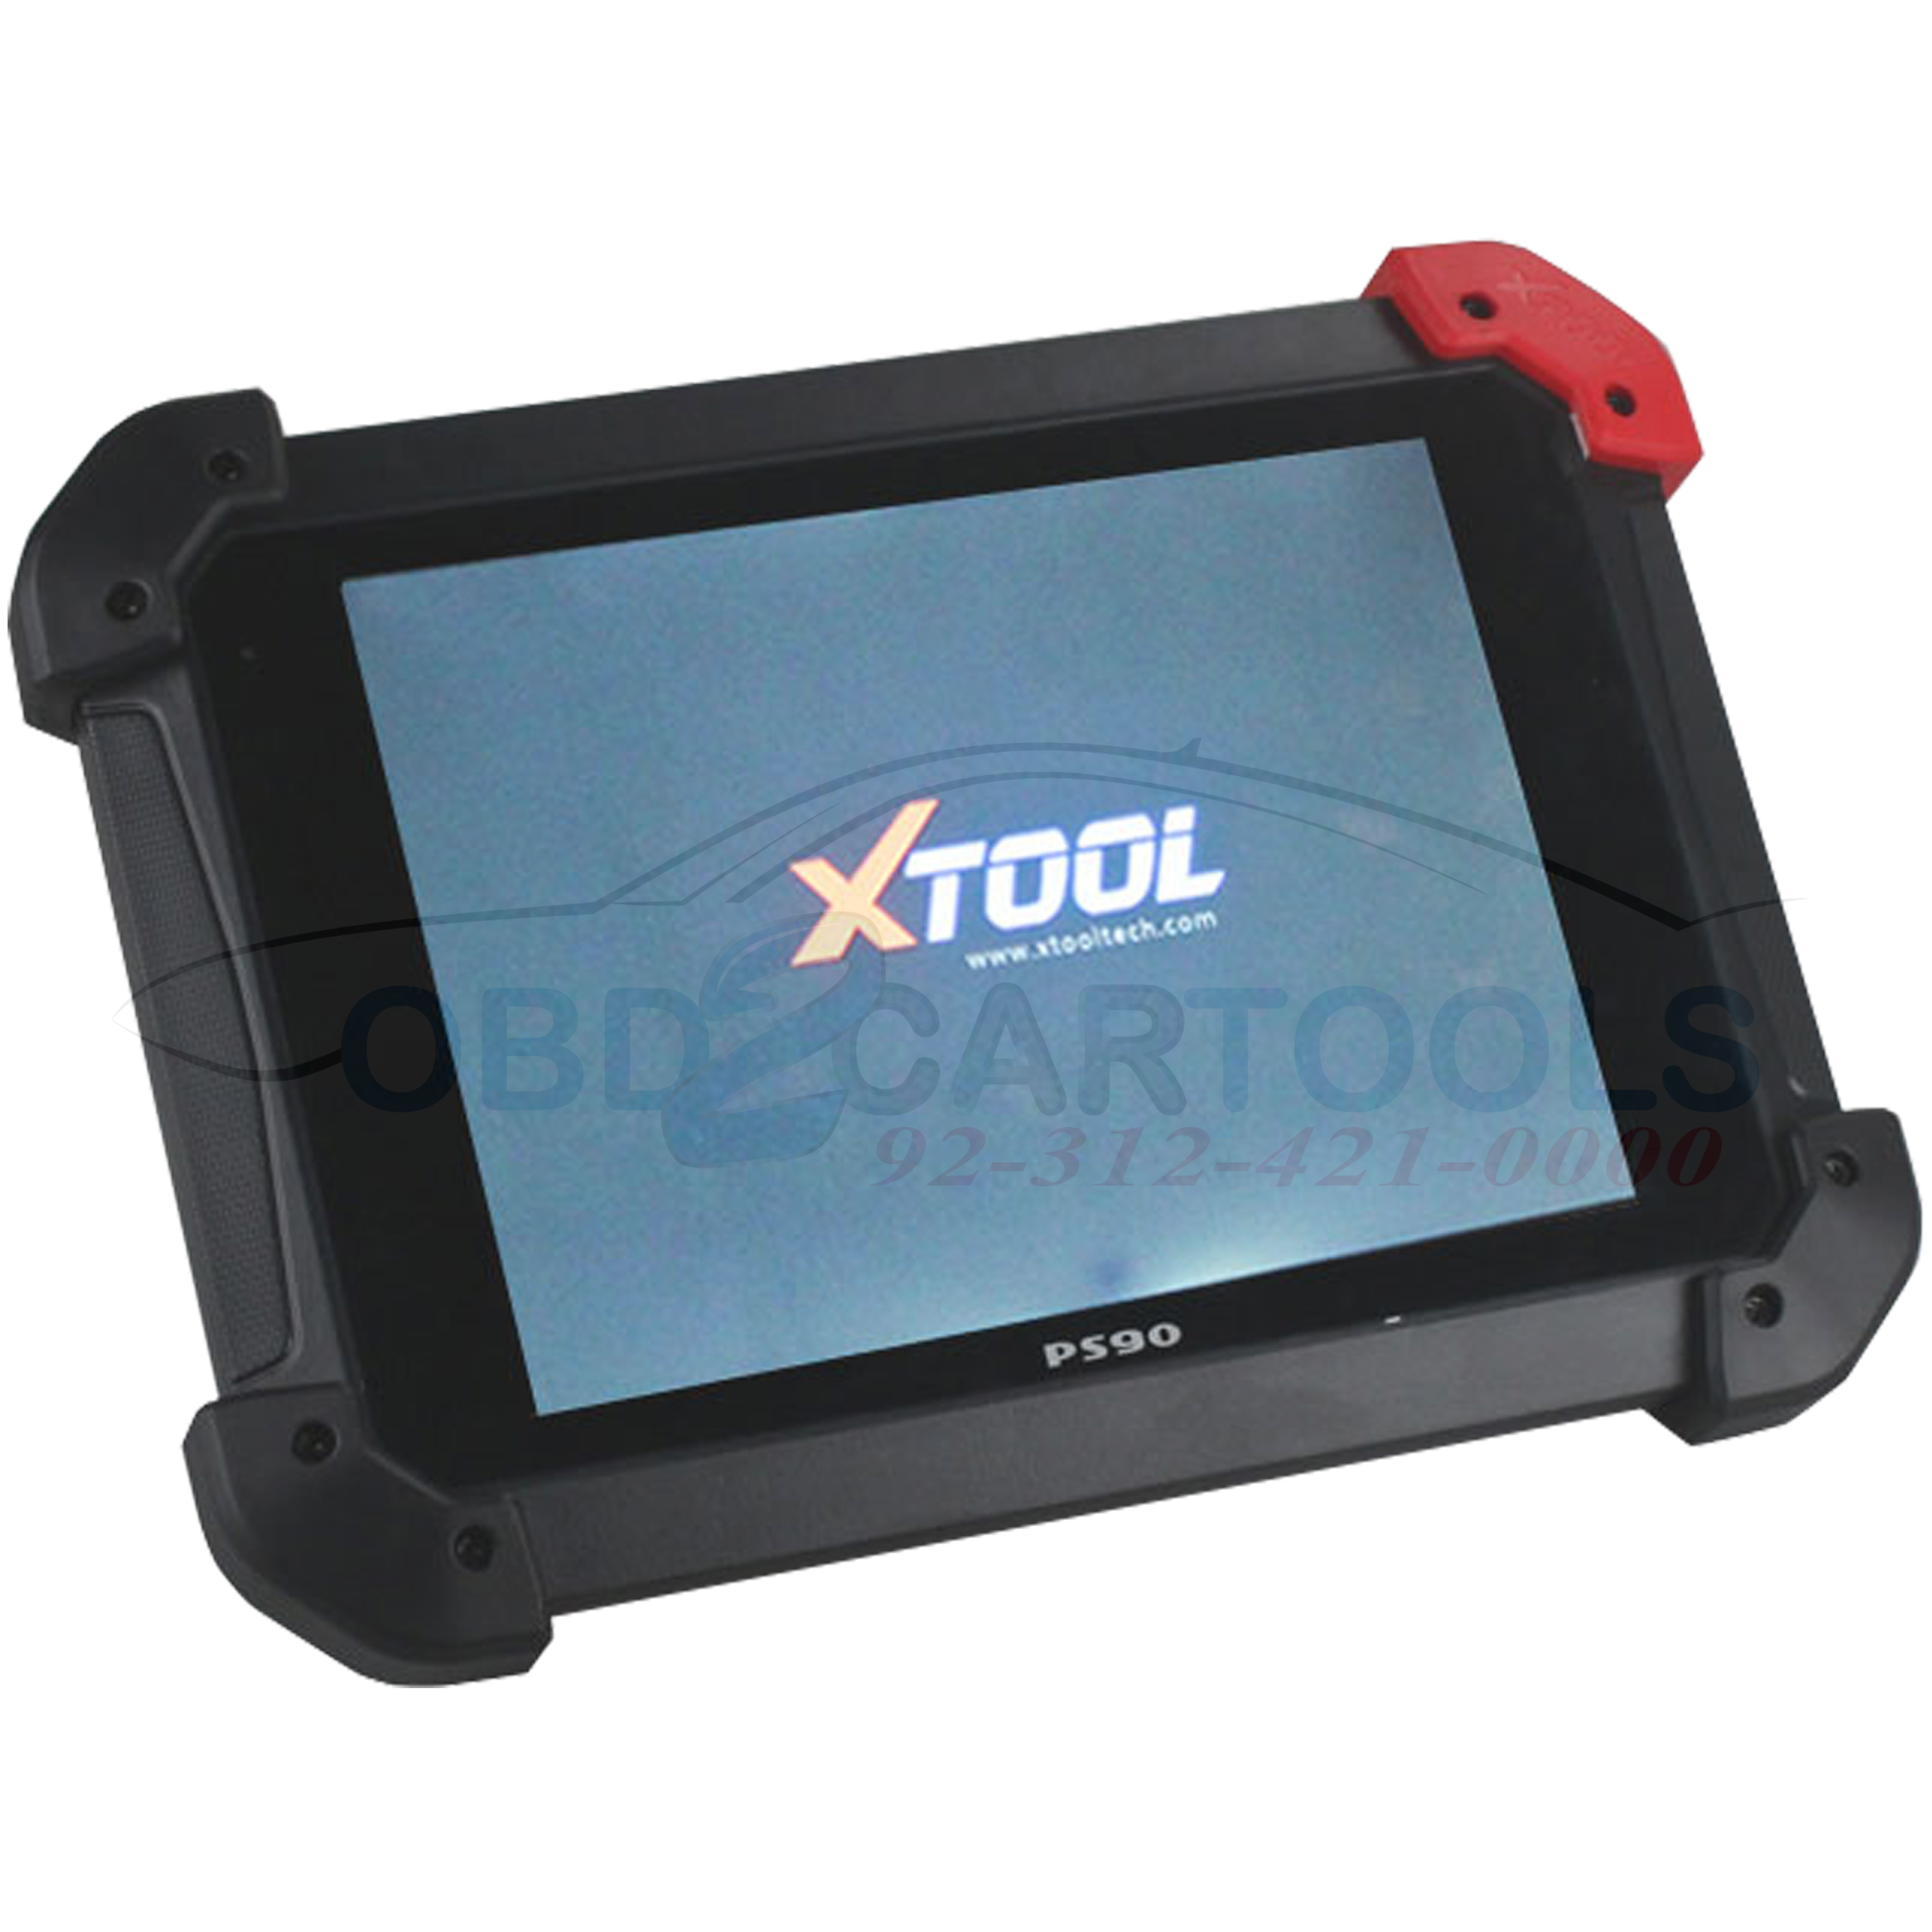 Product image for New XTool PS90 Vehicle Diagnostic Tool and Key programmer with WIFI and Android system